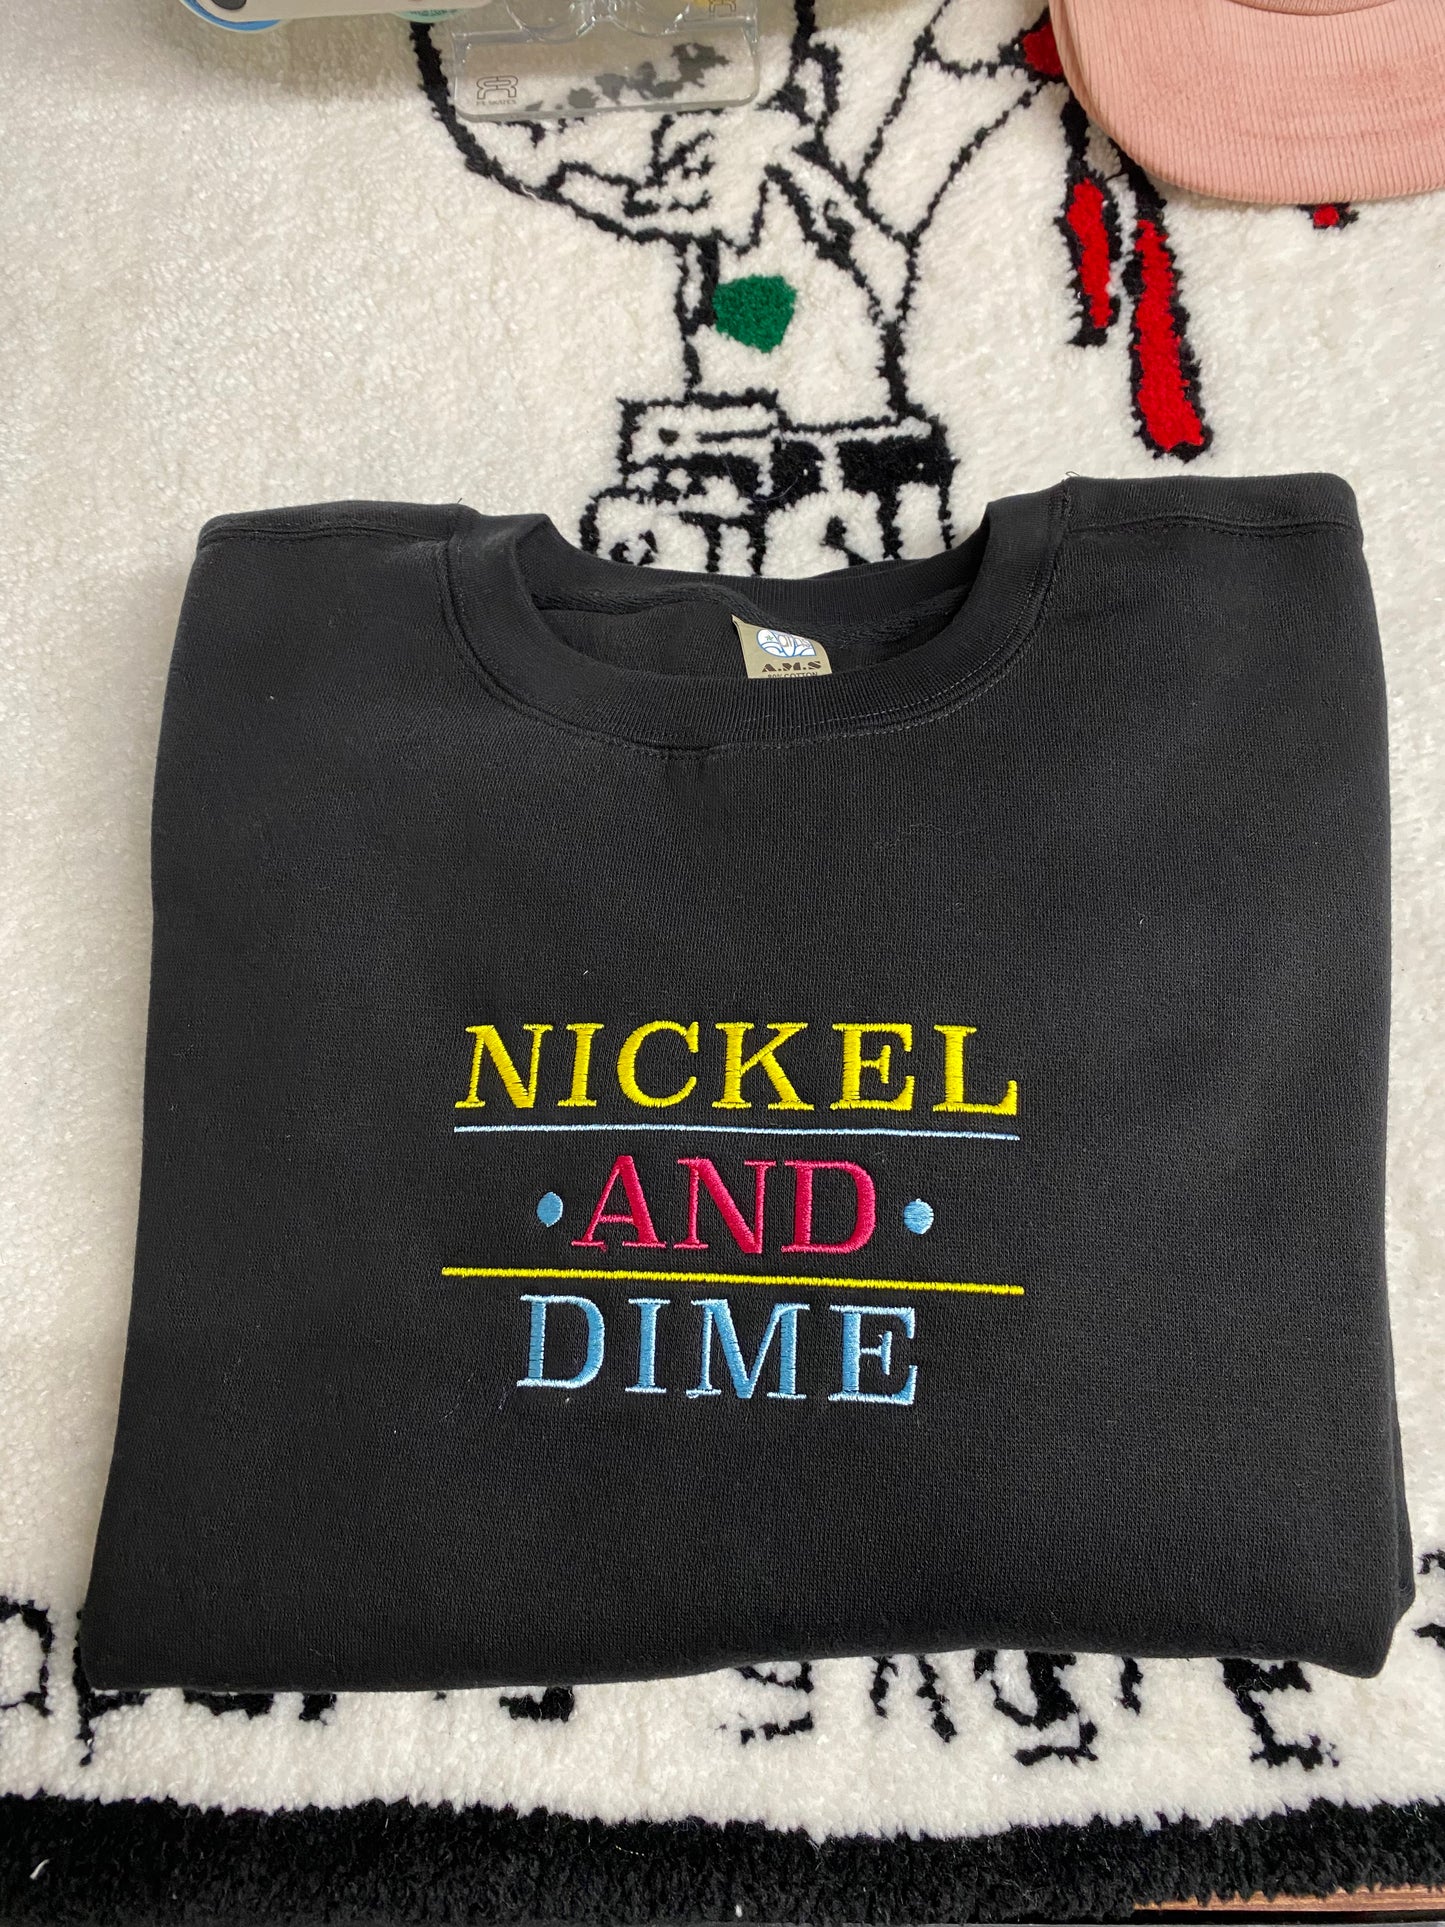 Nickel and Dime Skate Shop Blader Years crew neck sweater